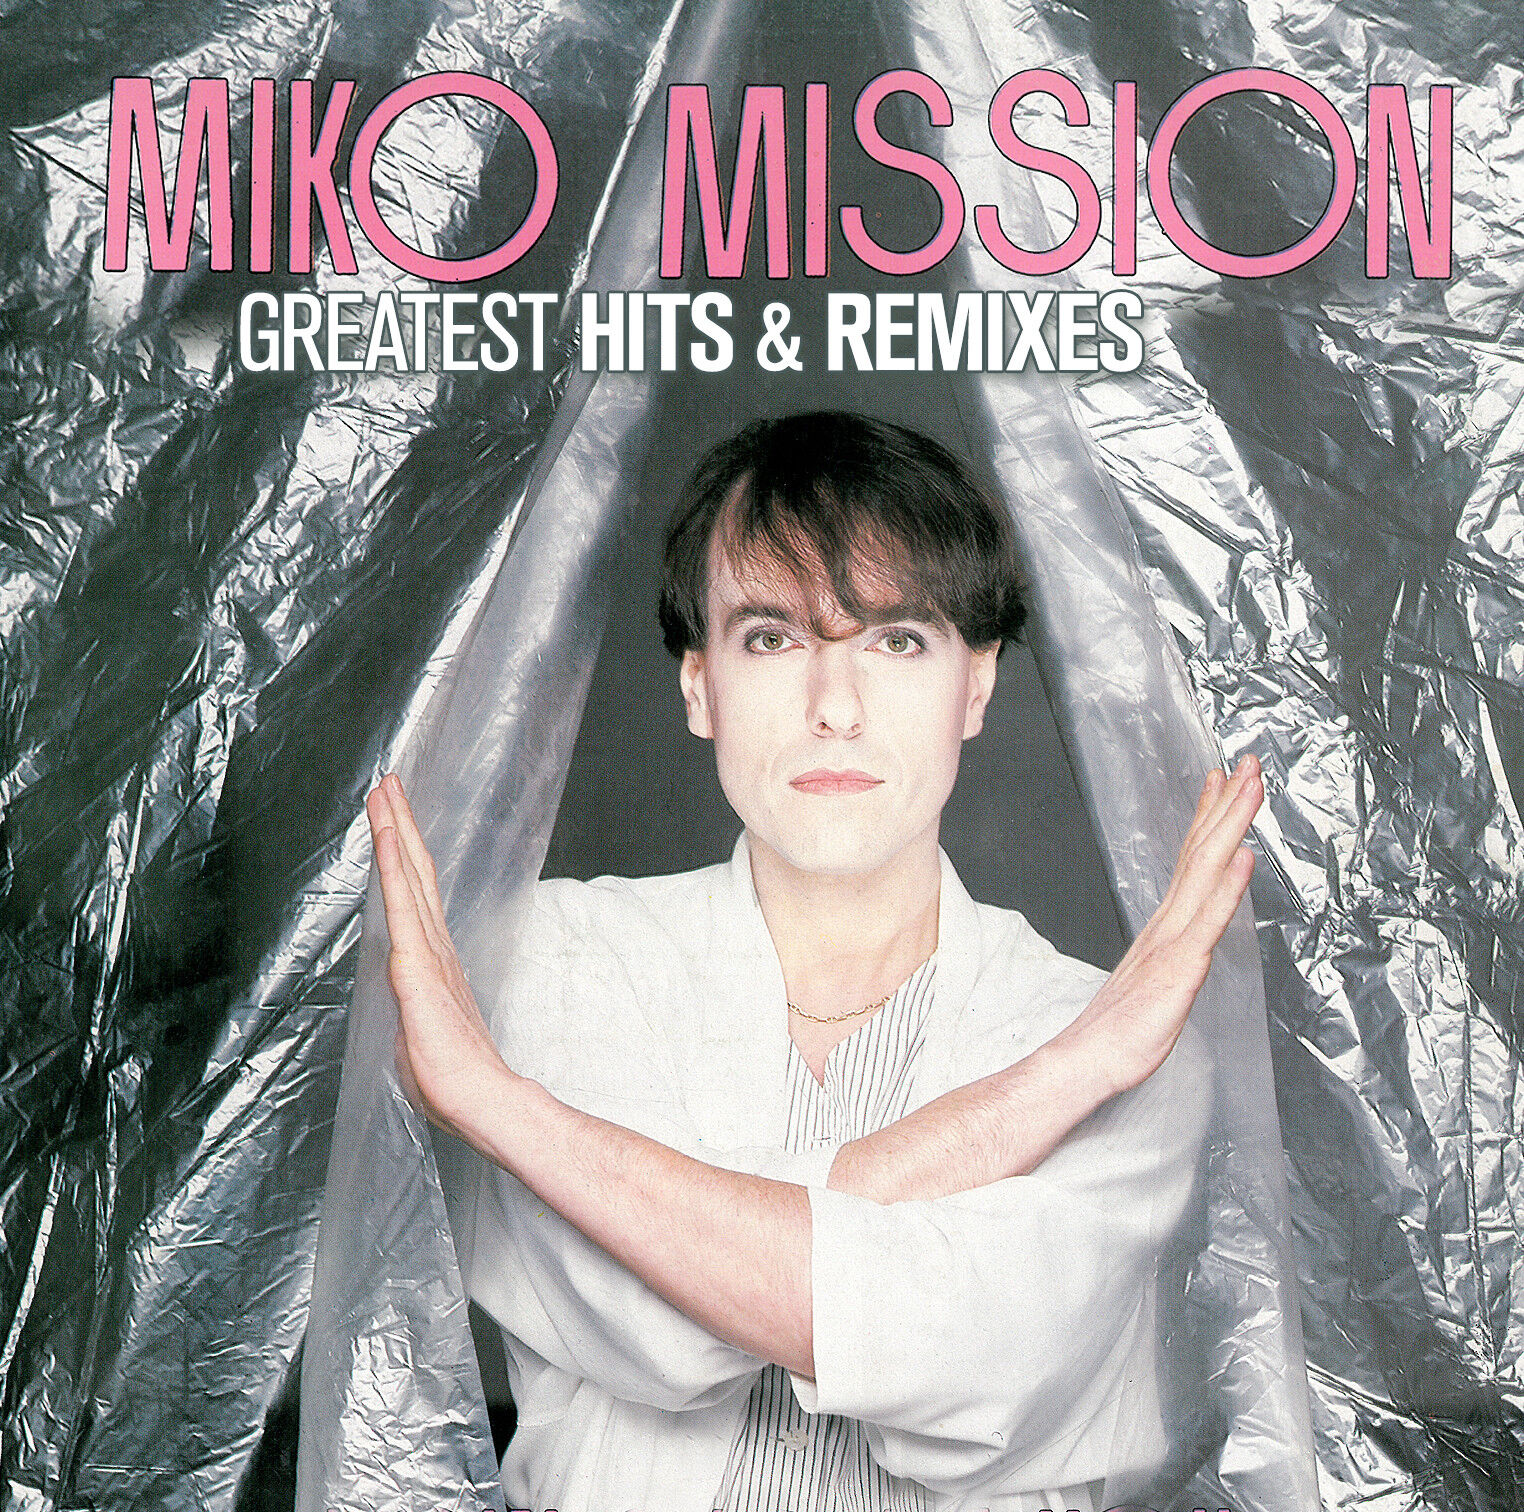 Italo CD Miko Mission Greatest Hits & Remixes 2CDs